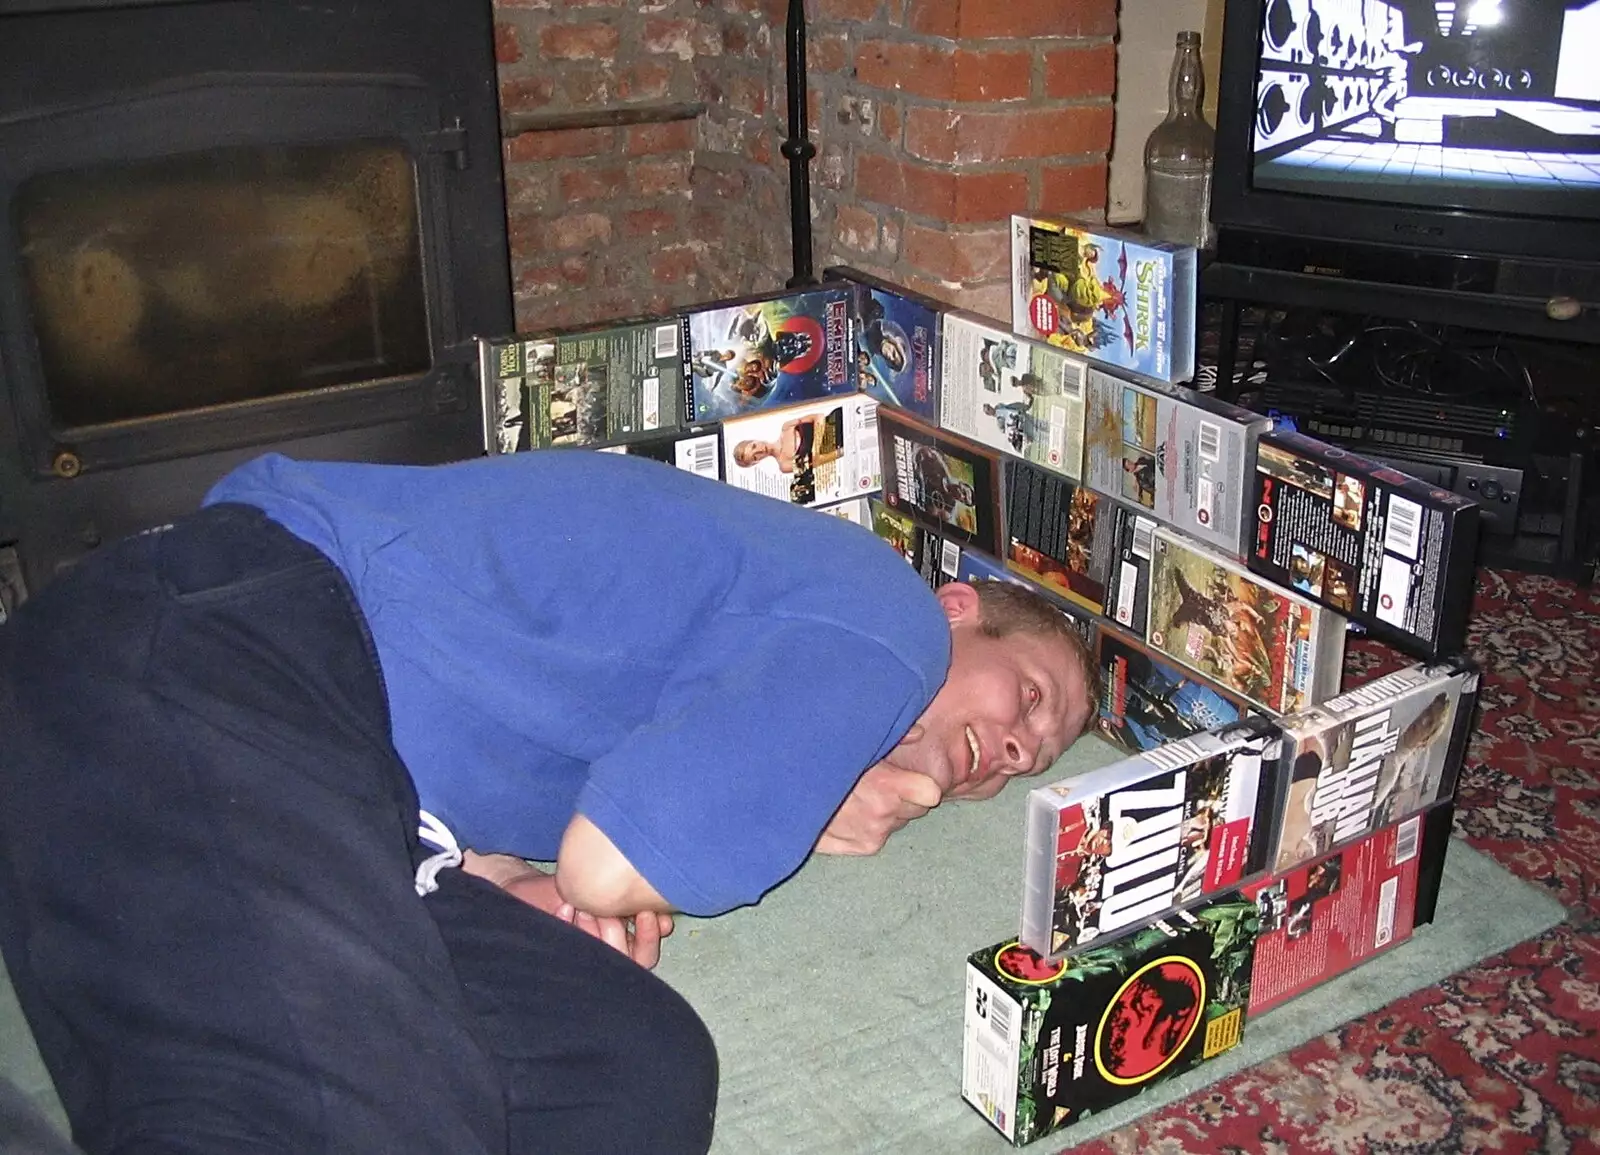 Bill enjoys his fort made of VHS cases, from A French Market, Blues and Curry, Diss, Scole and Brome - 17th October 2004